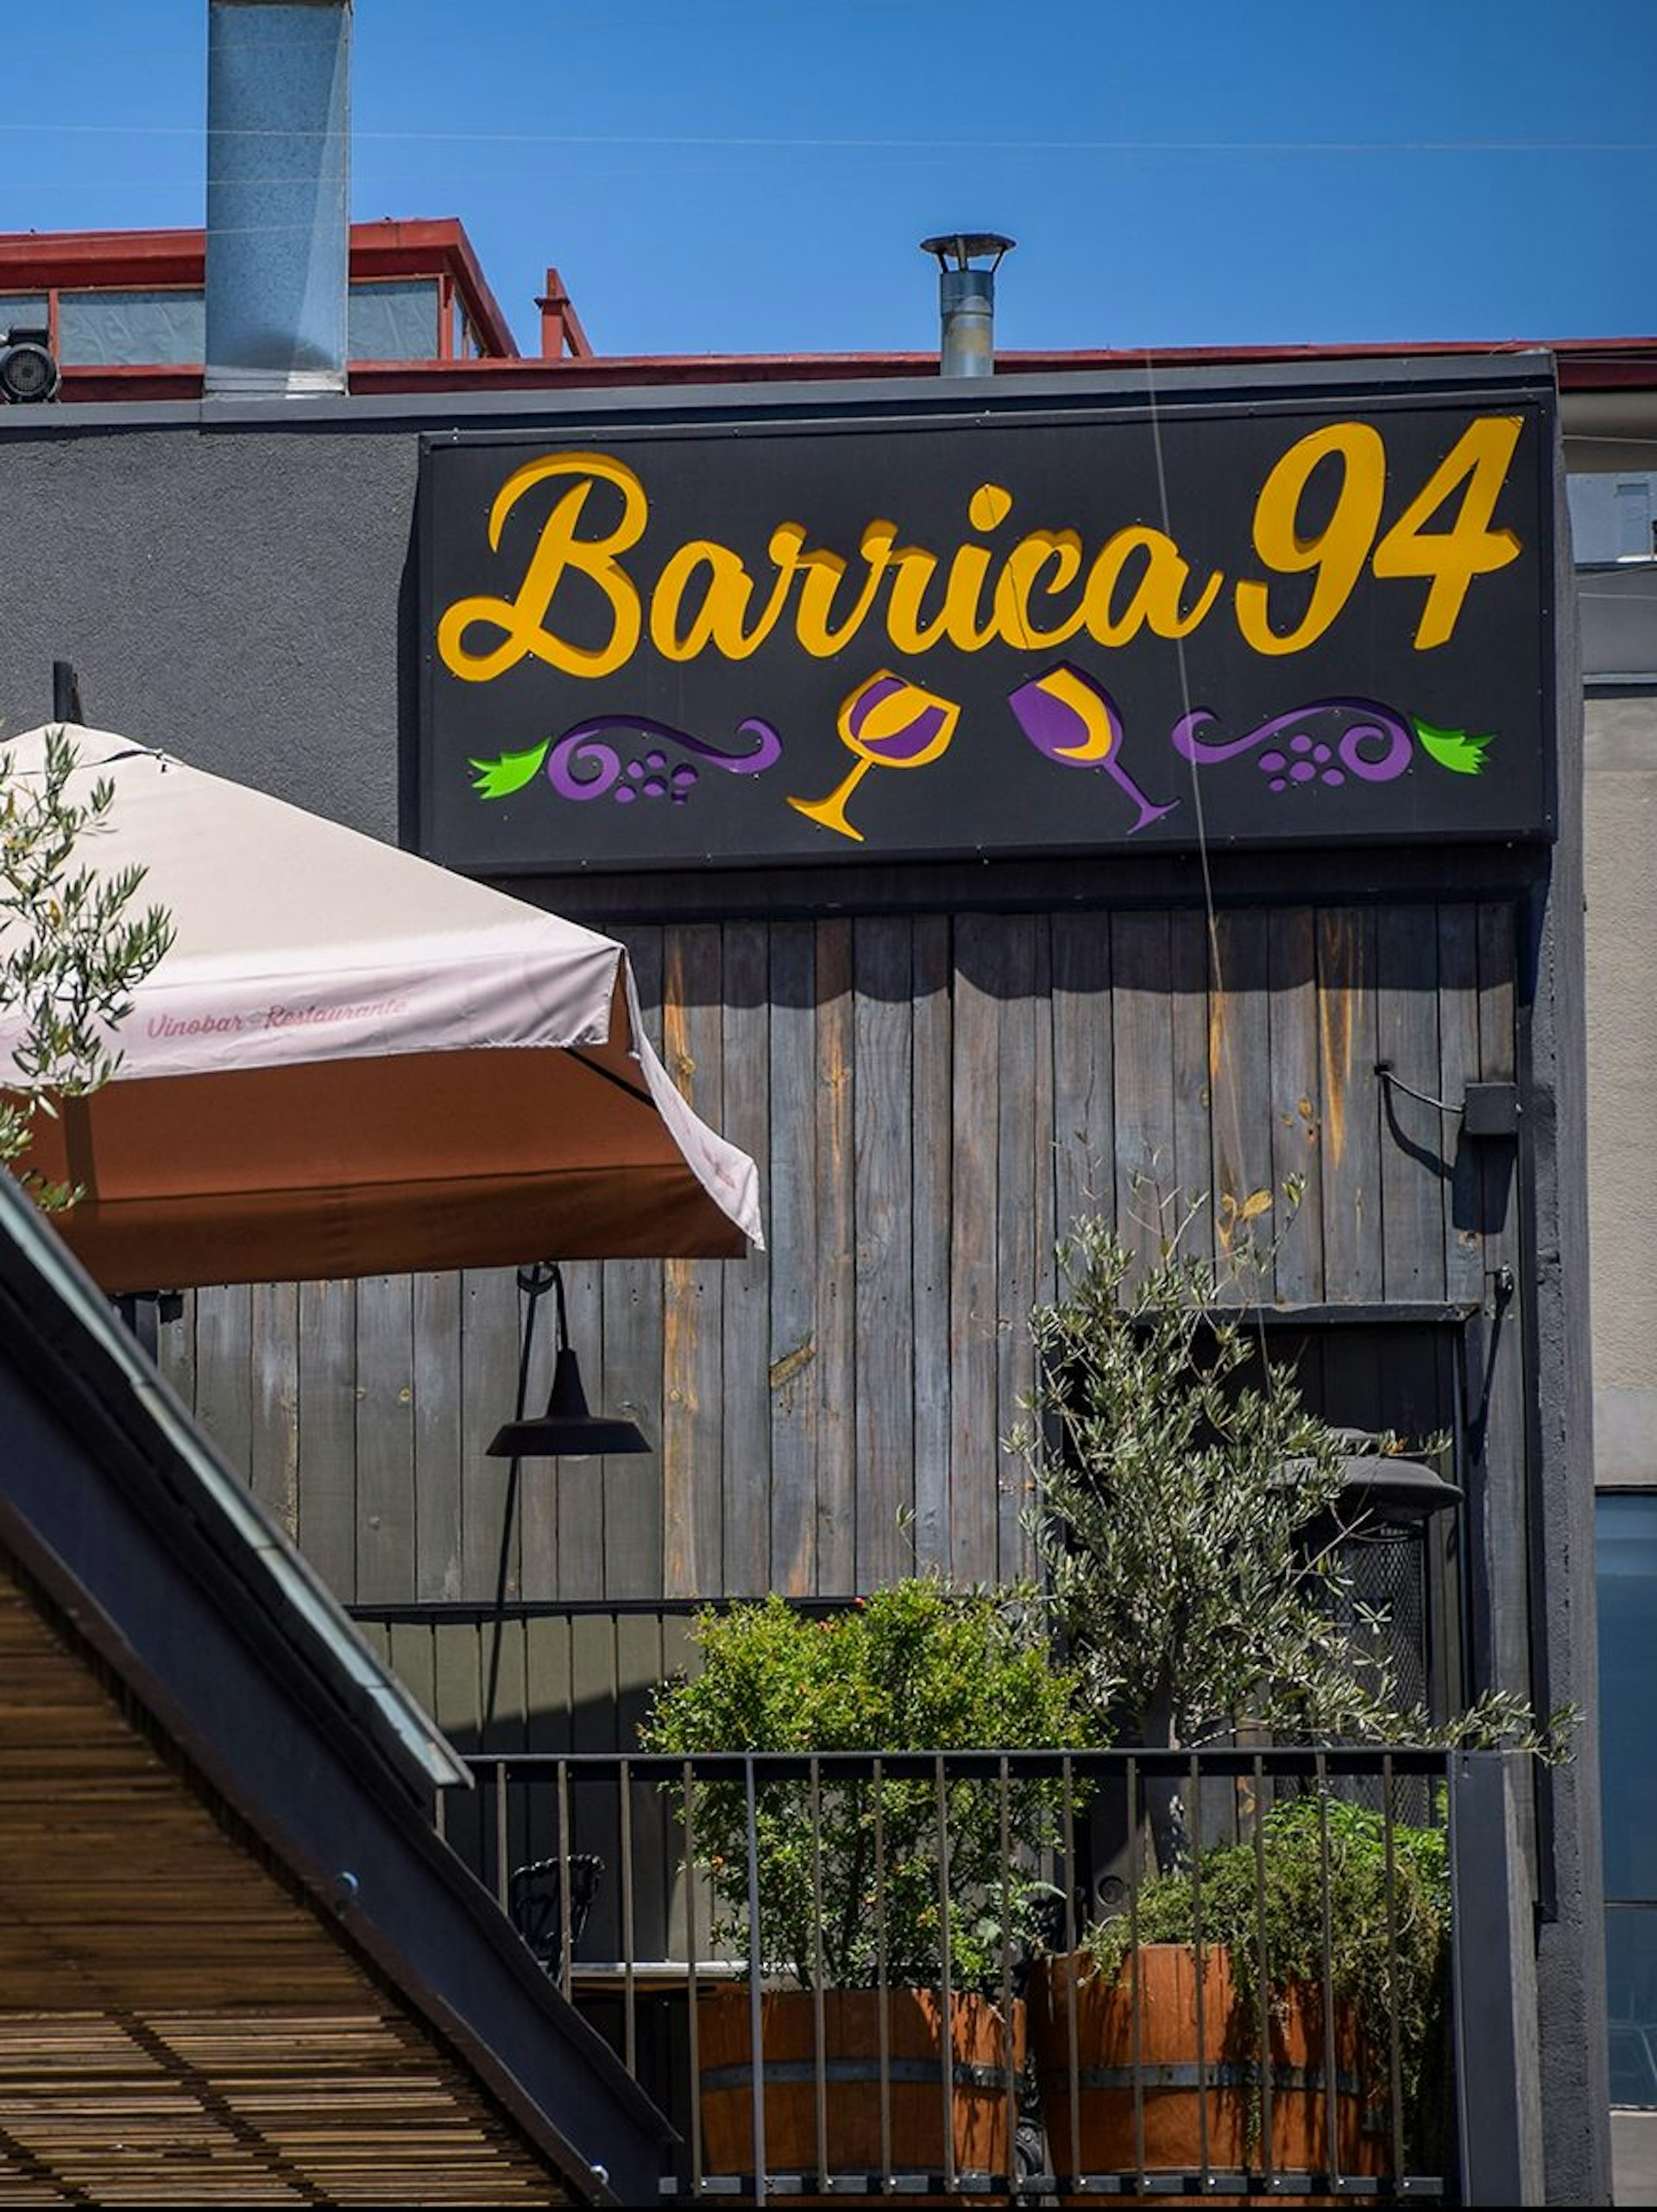 An external shot of the Barrica 94 sign, which features yellow cursive text, purple grapes, and two wine glasses